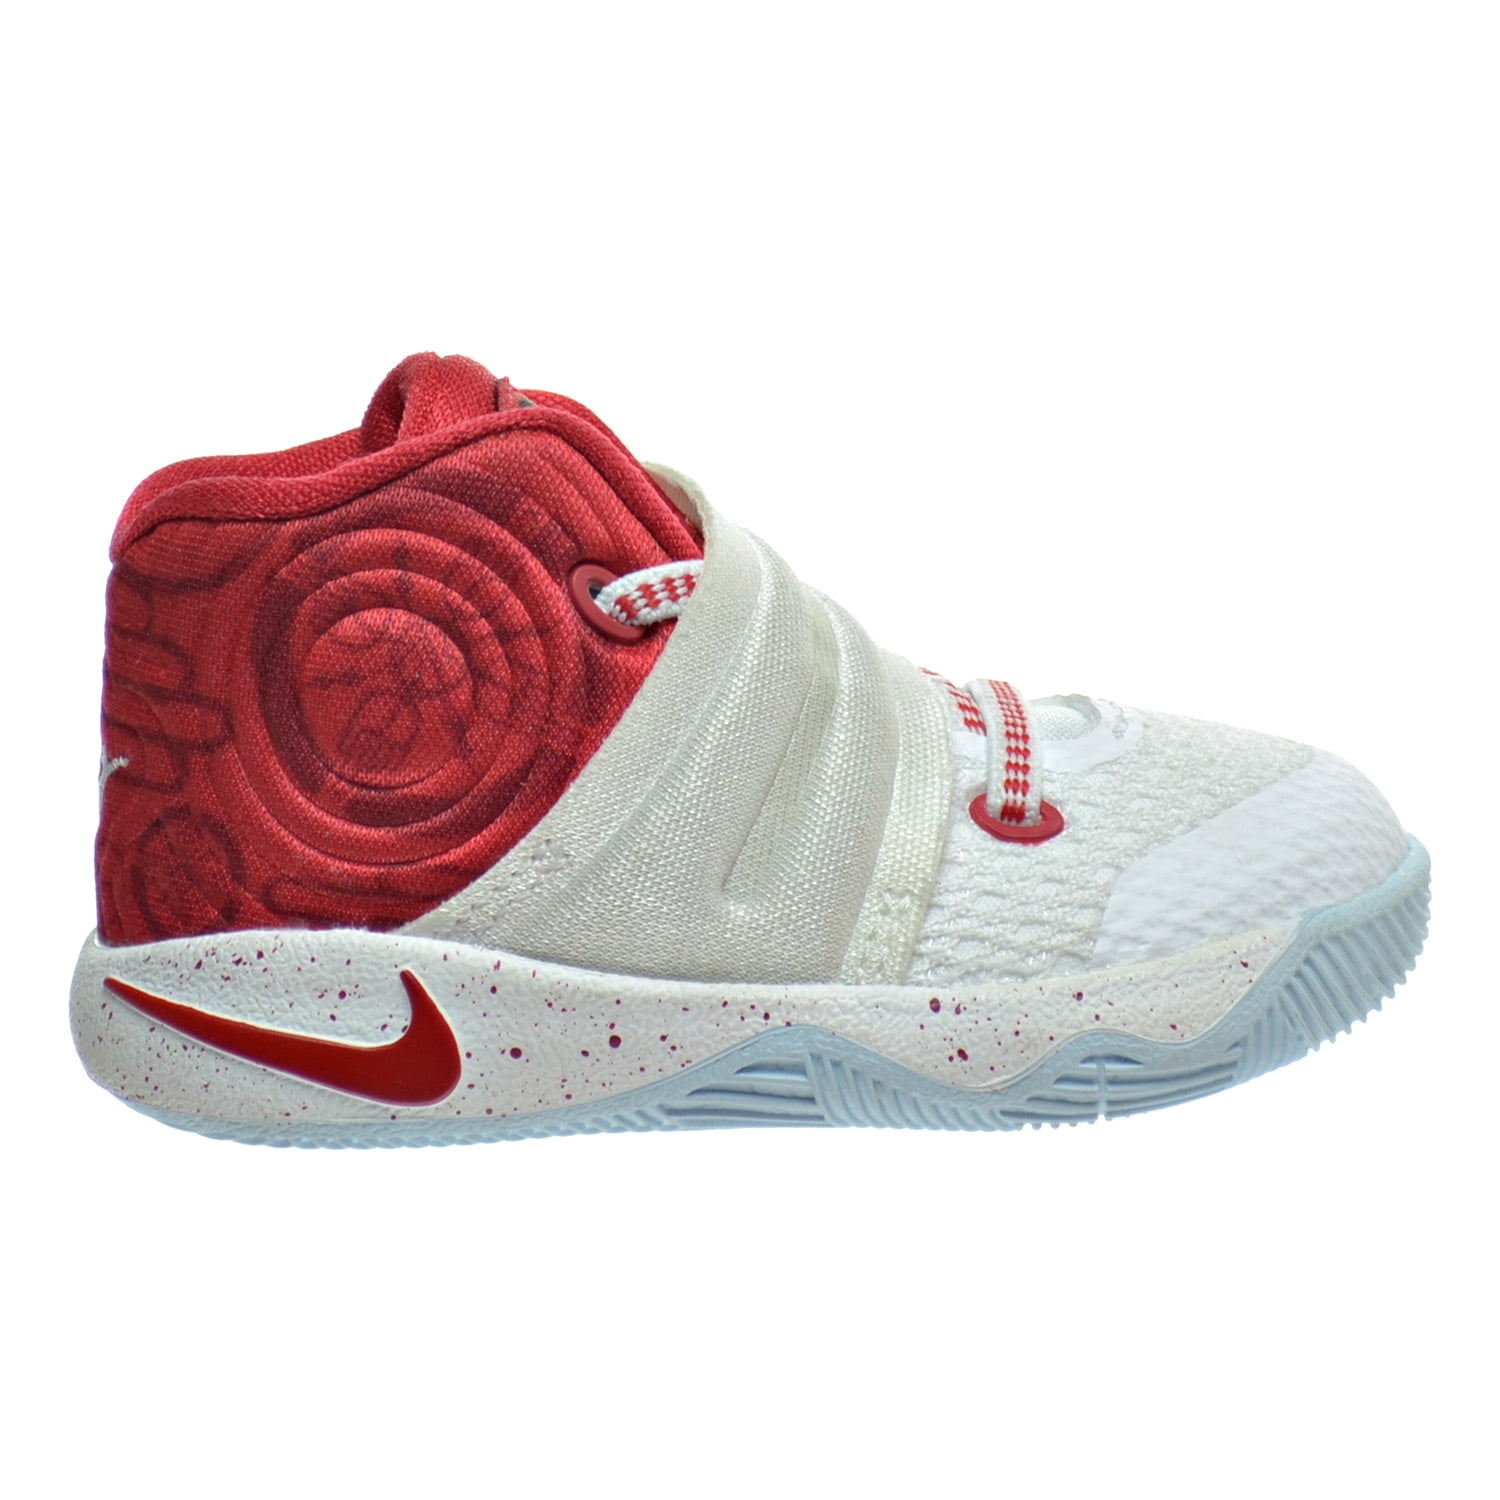 kyrie 2 shoes white